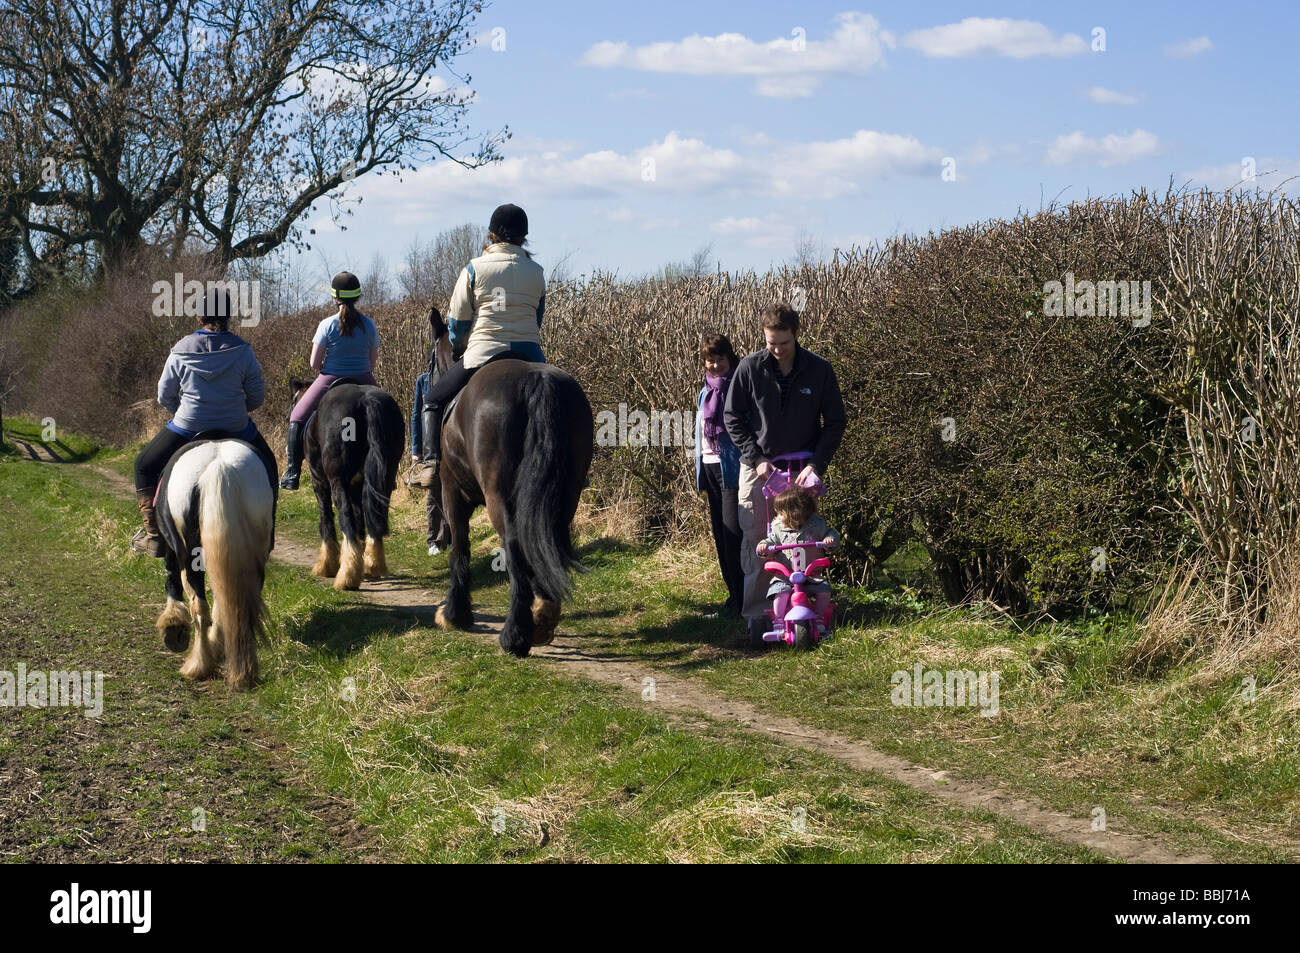 dh Access right of way HORSE RIDING UK Riders people footpath horseriders walkers horseriding horseback foot path field yorkshire england footpaths Stock Photo